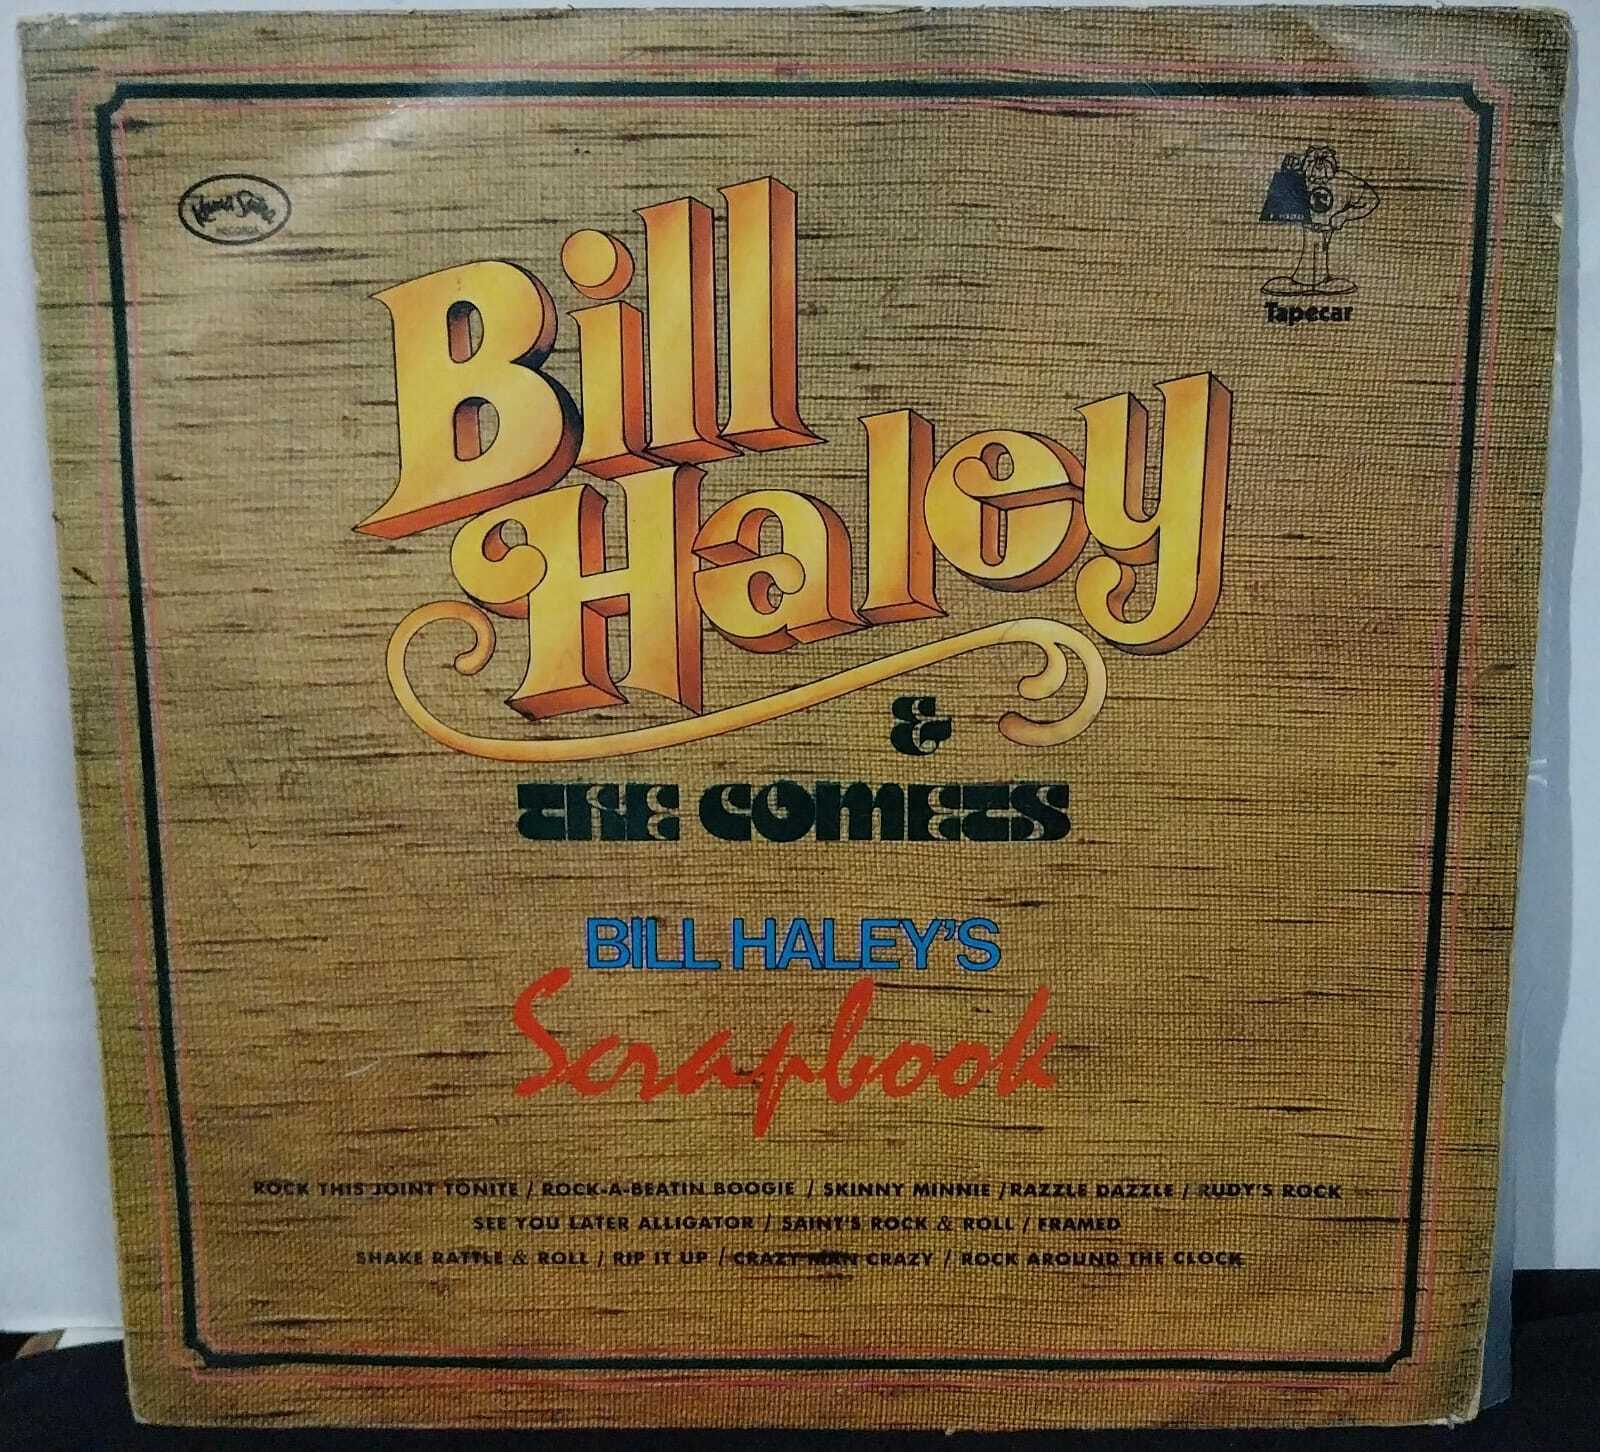 Vinil - Bill Haley and the Comets - Scrapbook